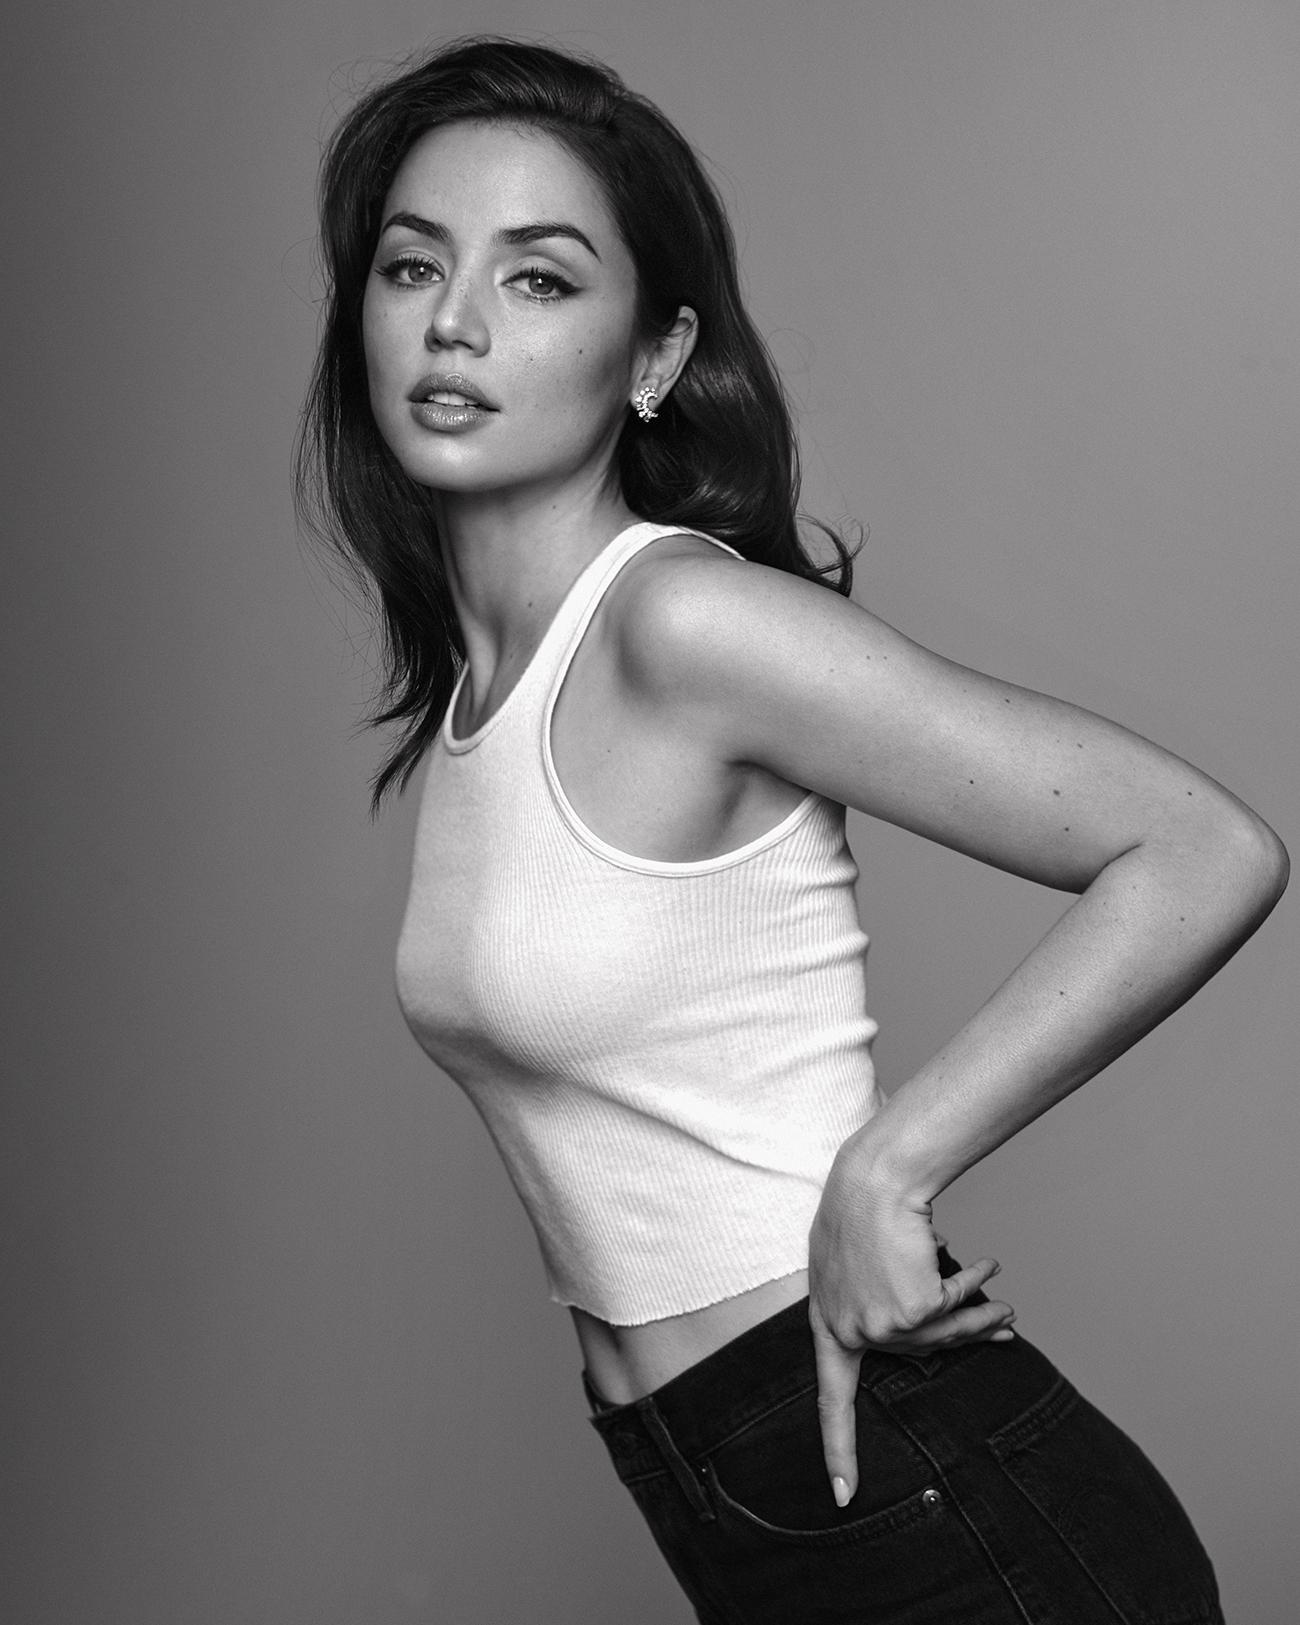 andrew hallford recommends Ana De Armas Sexiest Pics